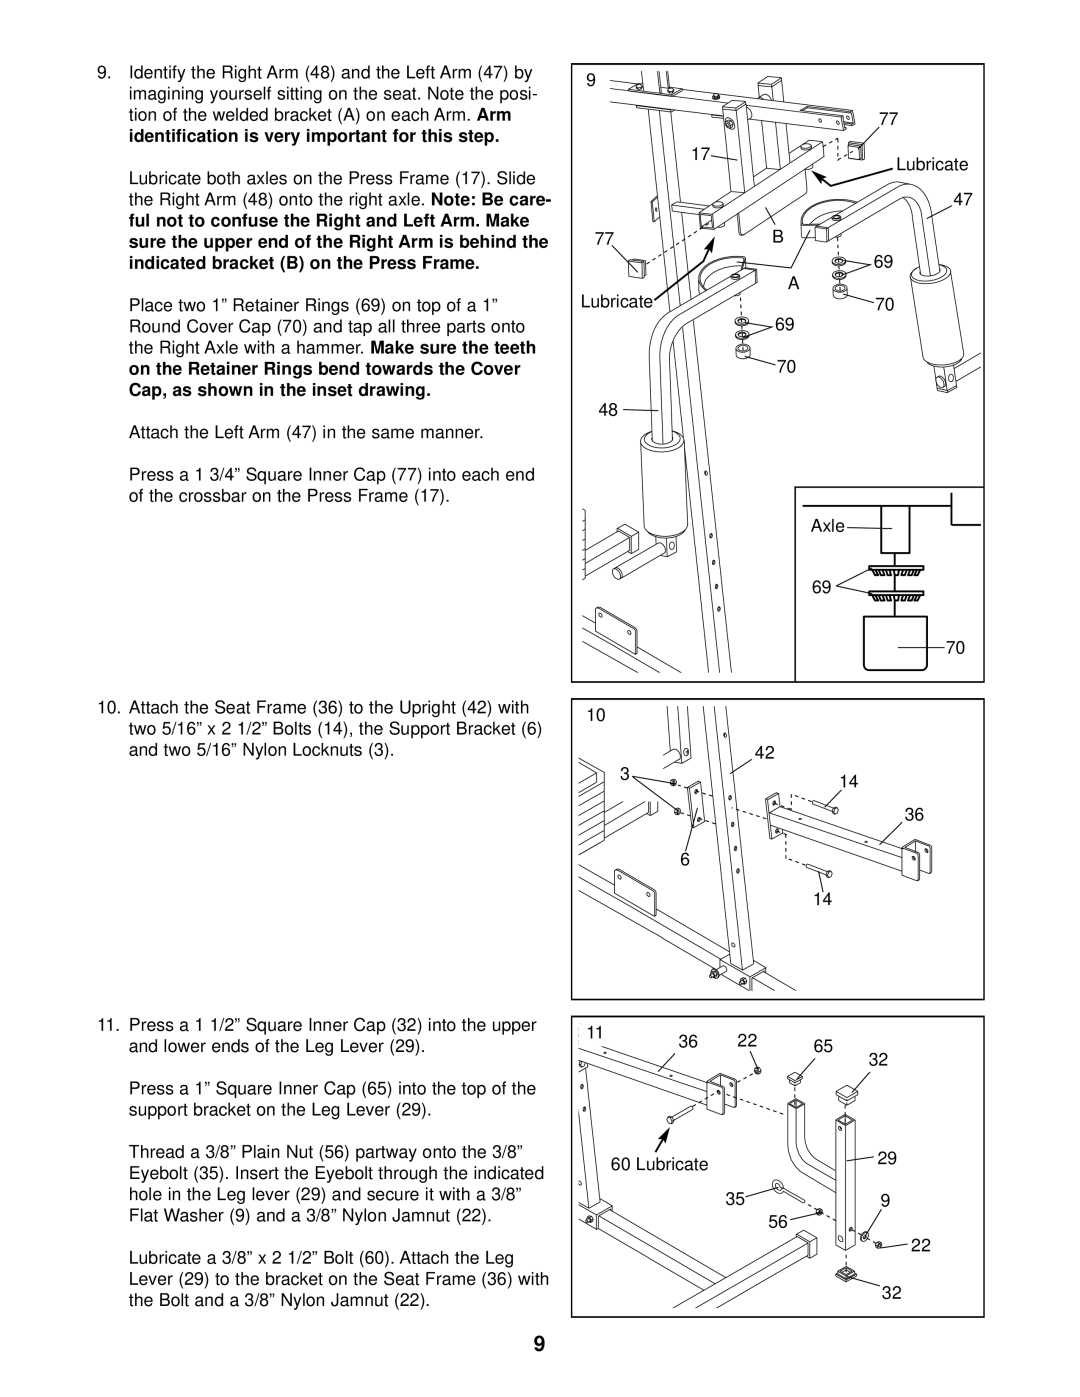 Weider 740 user manual tion of the welded bracket A on each Arm 